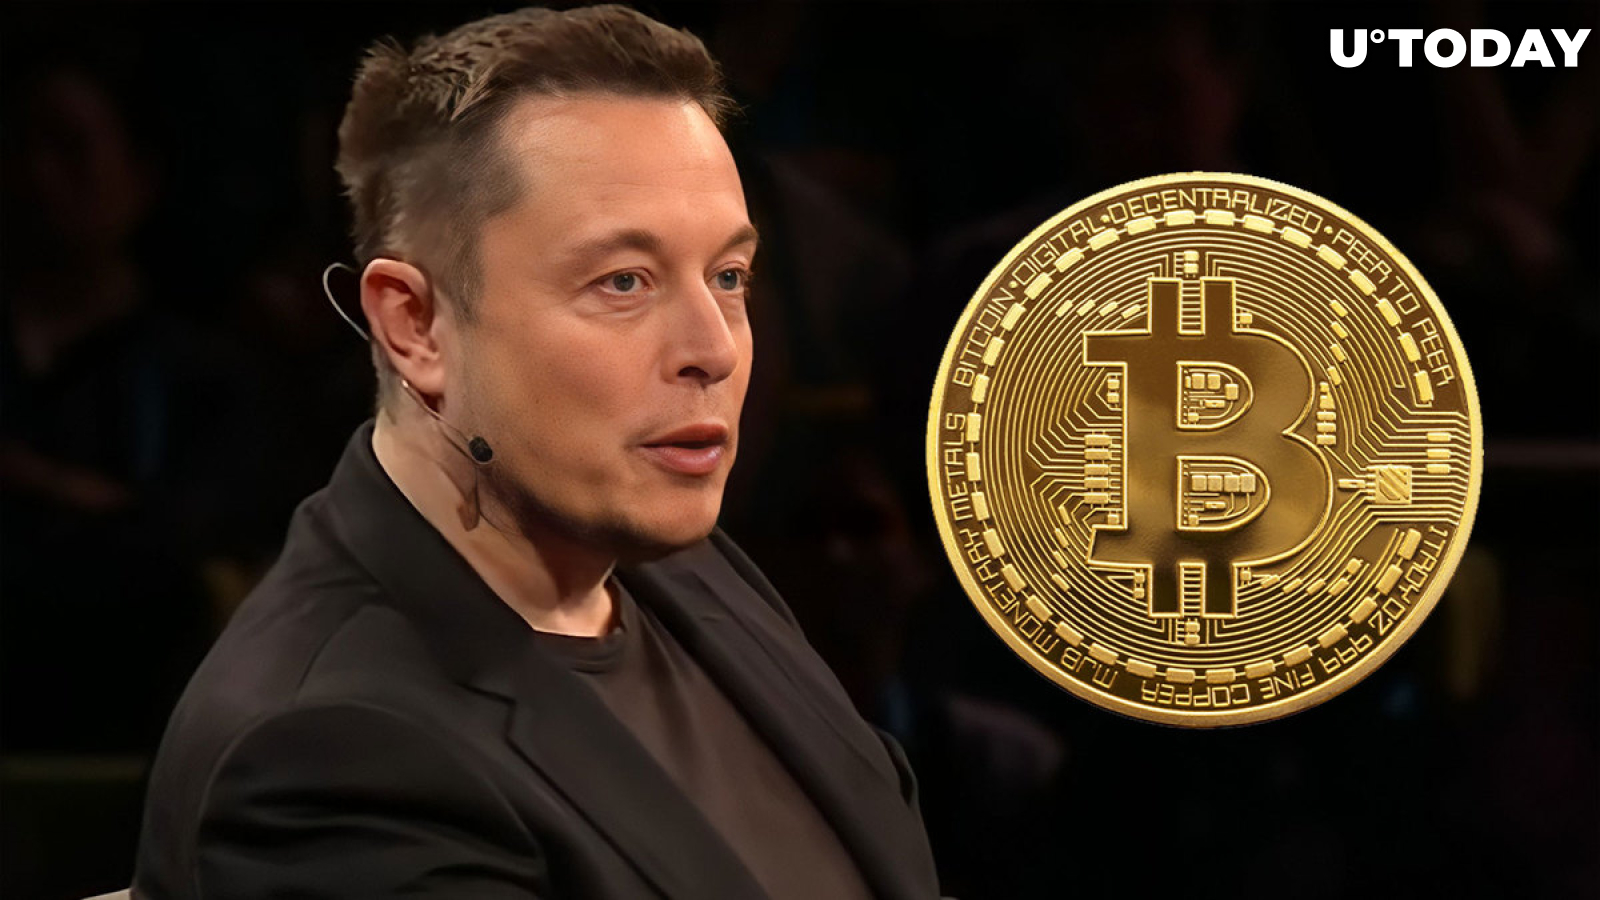 Bitcoin Sees Another Threat? - Elon Musk Just Might Be Hinting At This